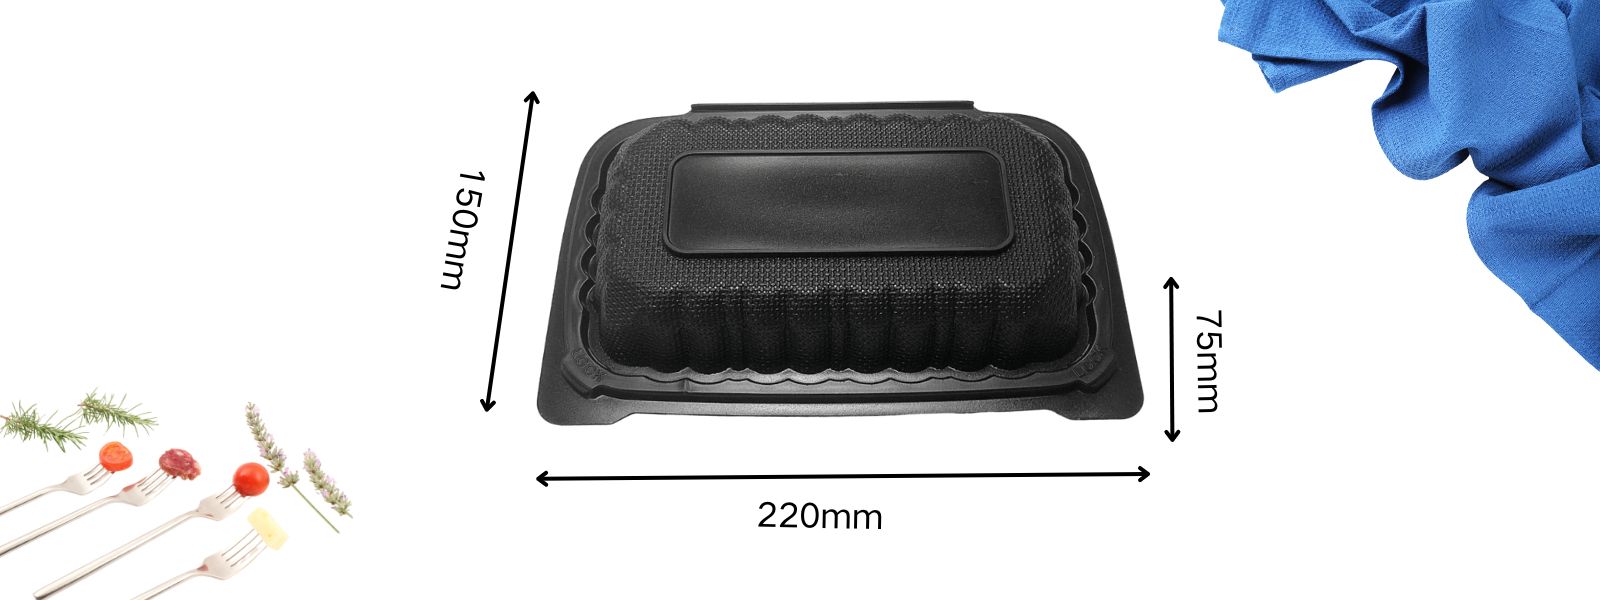 The length, width and height dimensions of the black rectangular clamshell container